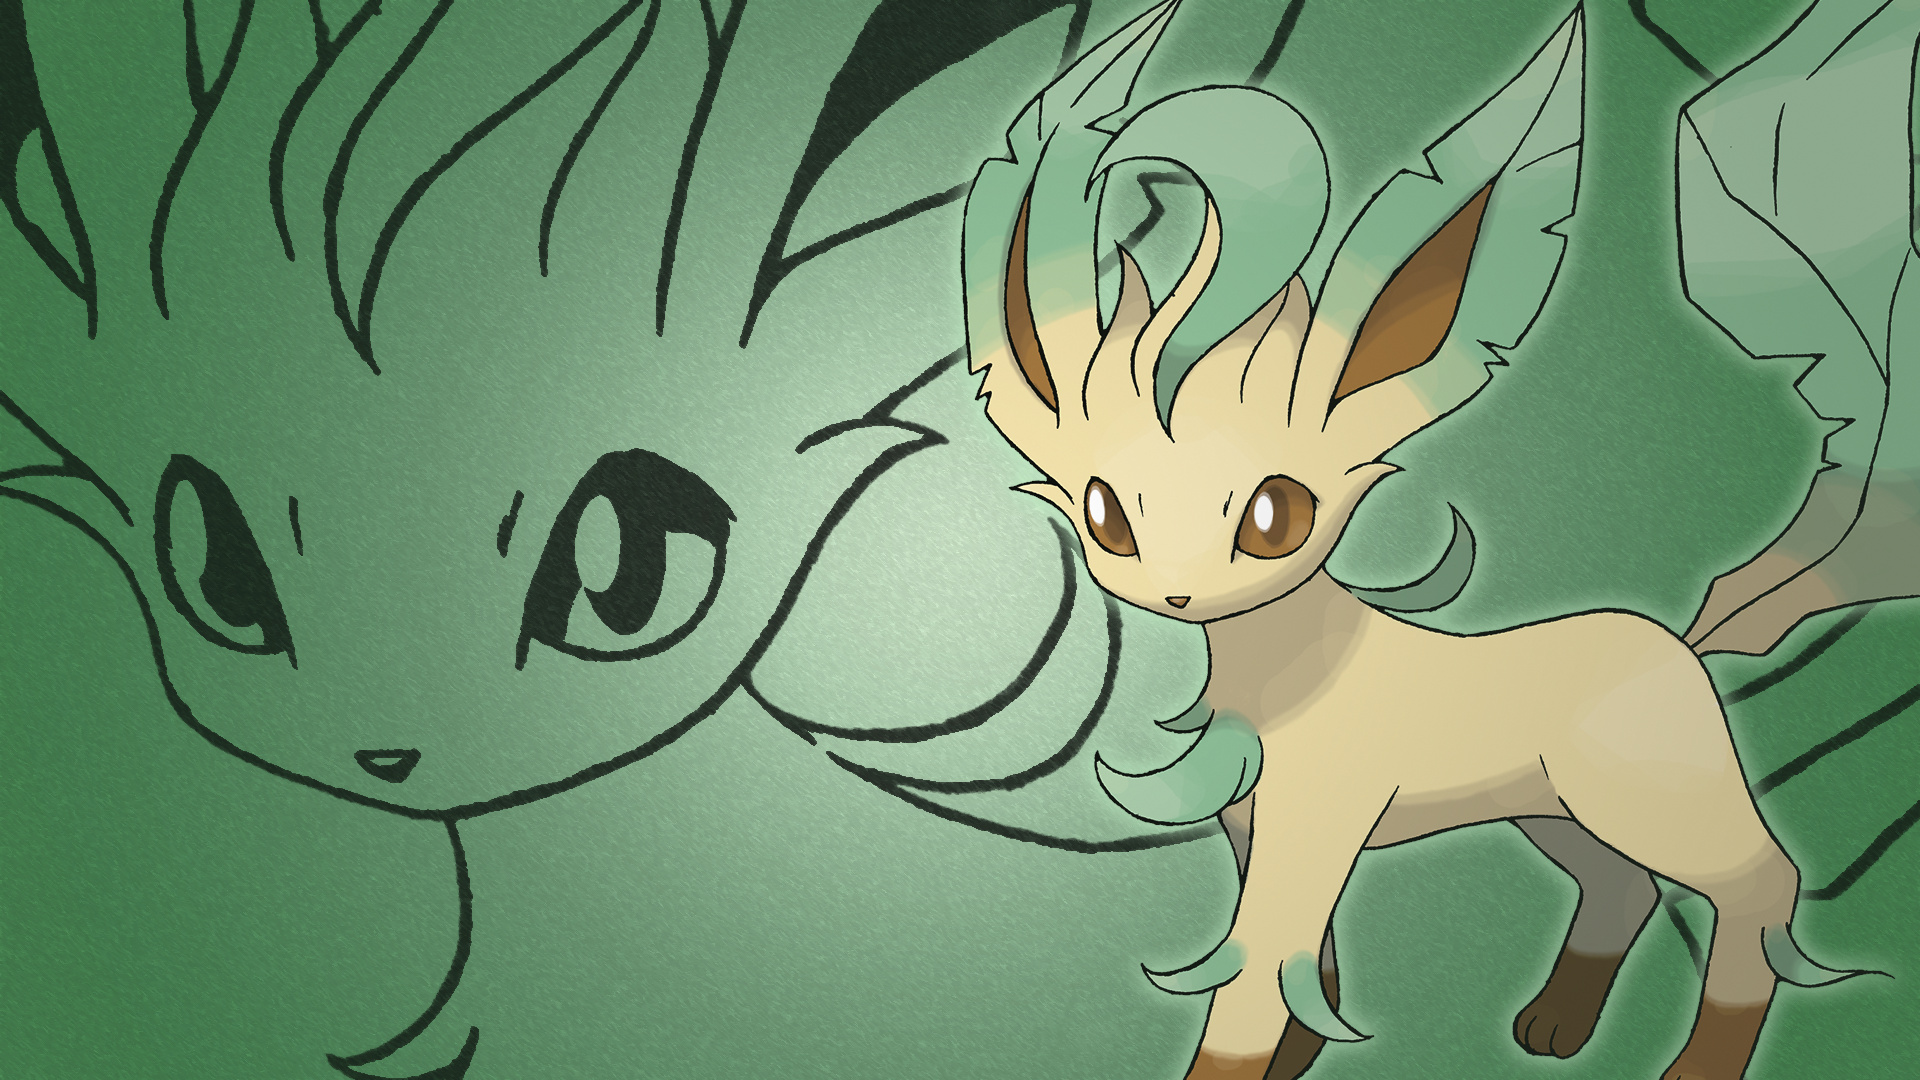 Leafeon, Pokmon wallpaper, Cute and colorful, Anime style, 1920x1080 Full HD Desktop